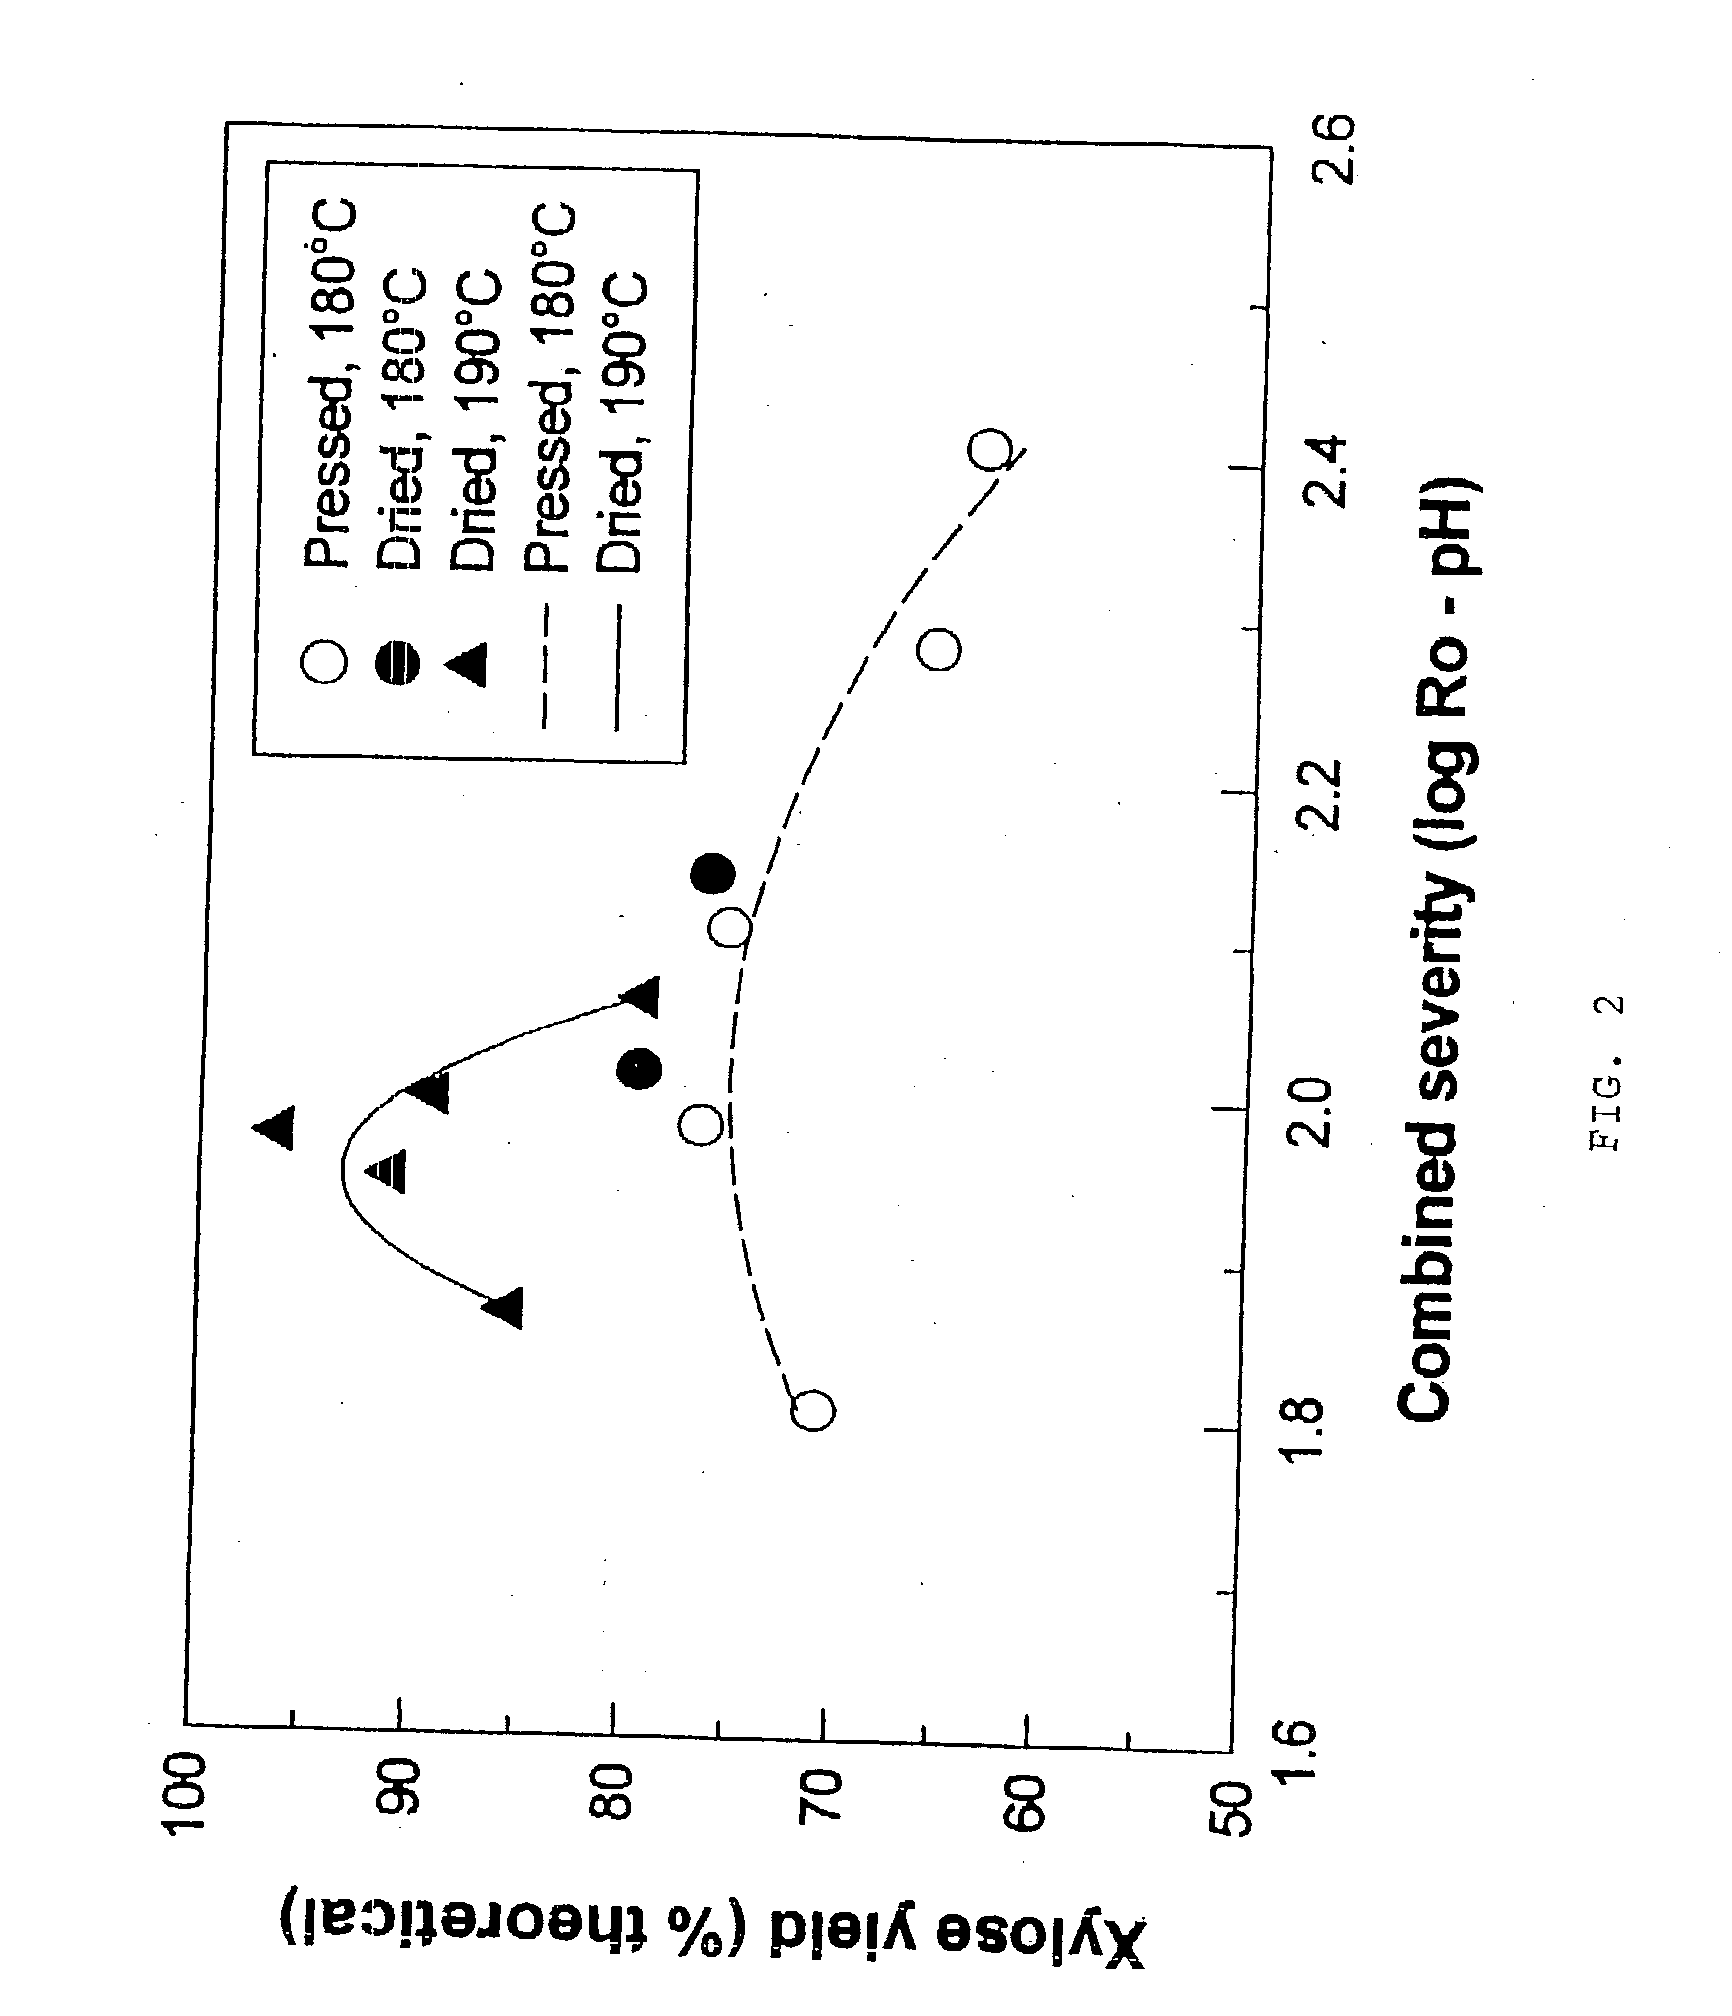 Ethanol production with dilute acid hydrolysis using partially dried lignocellulosics